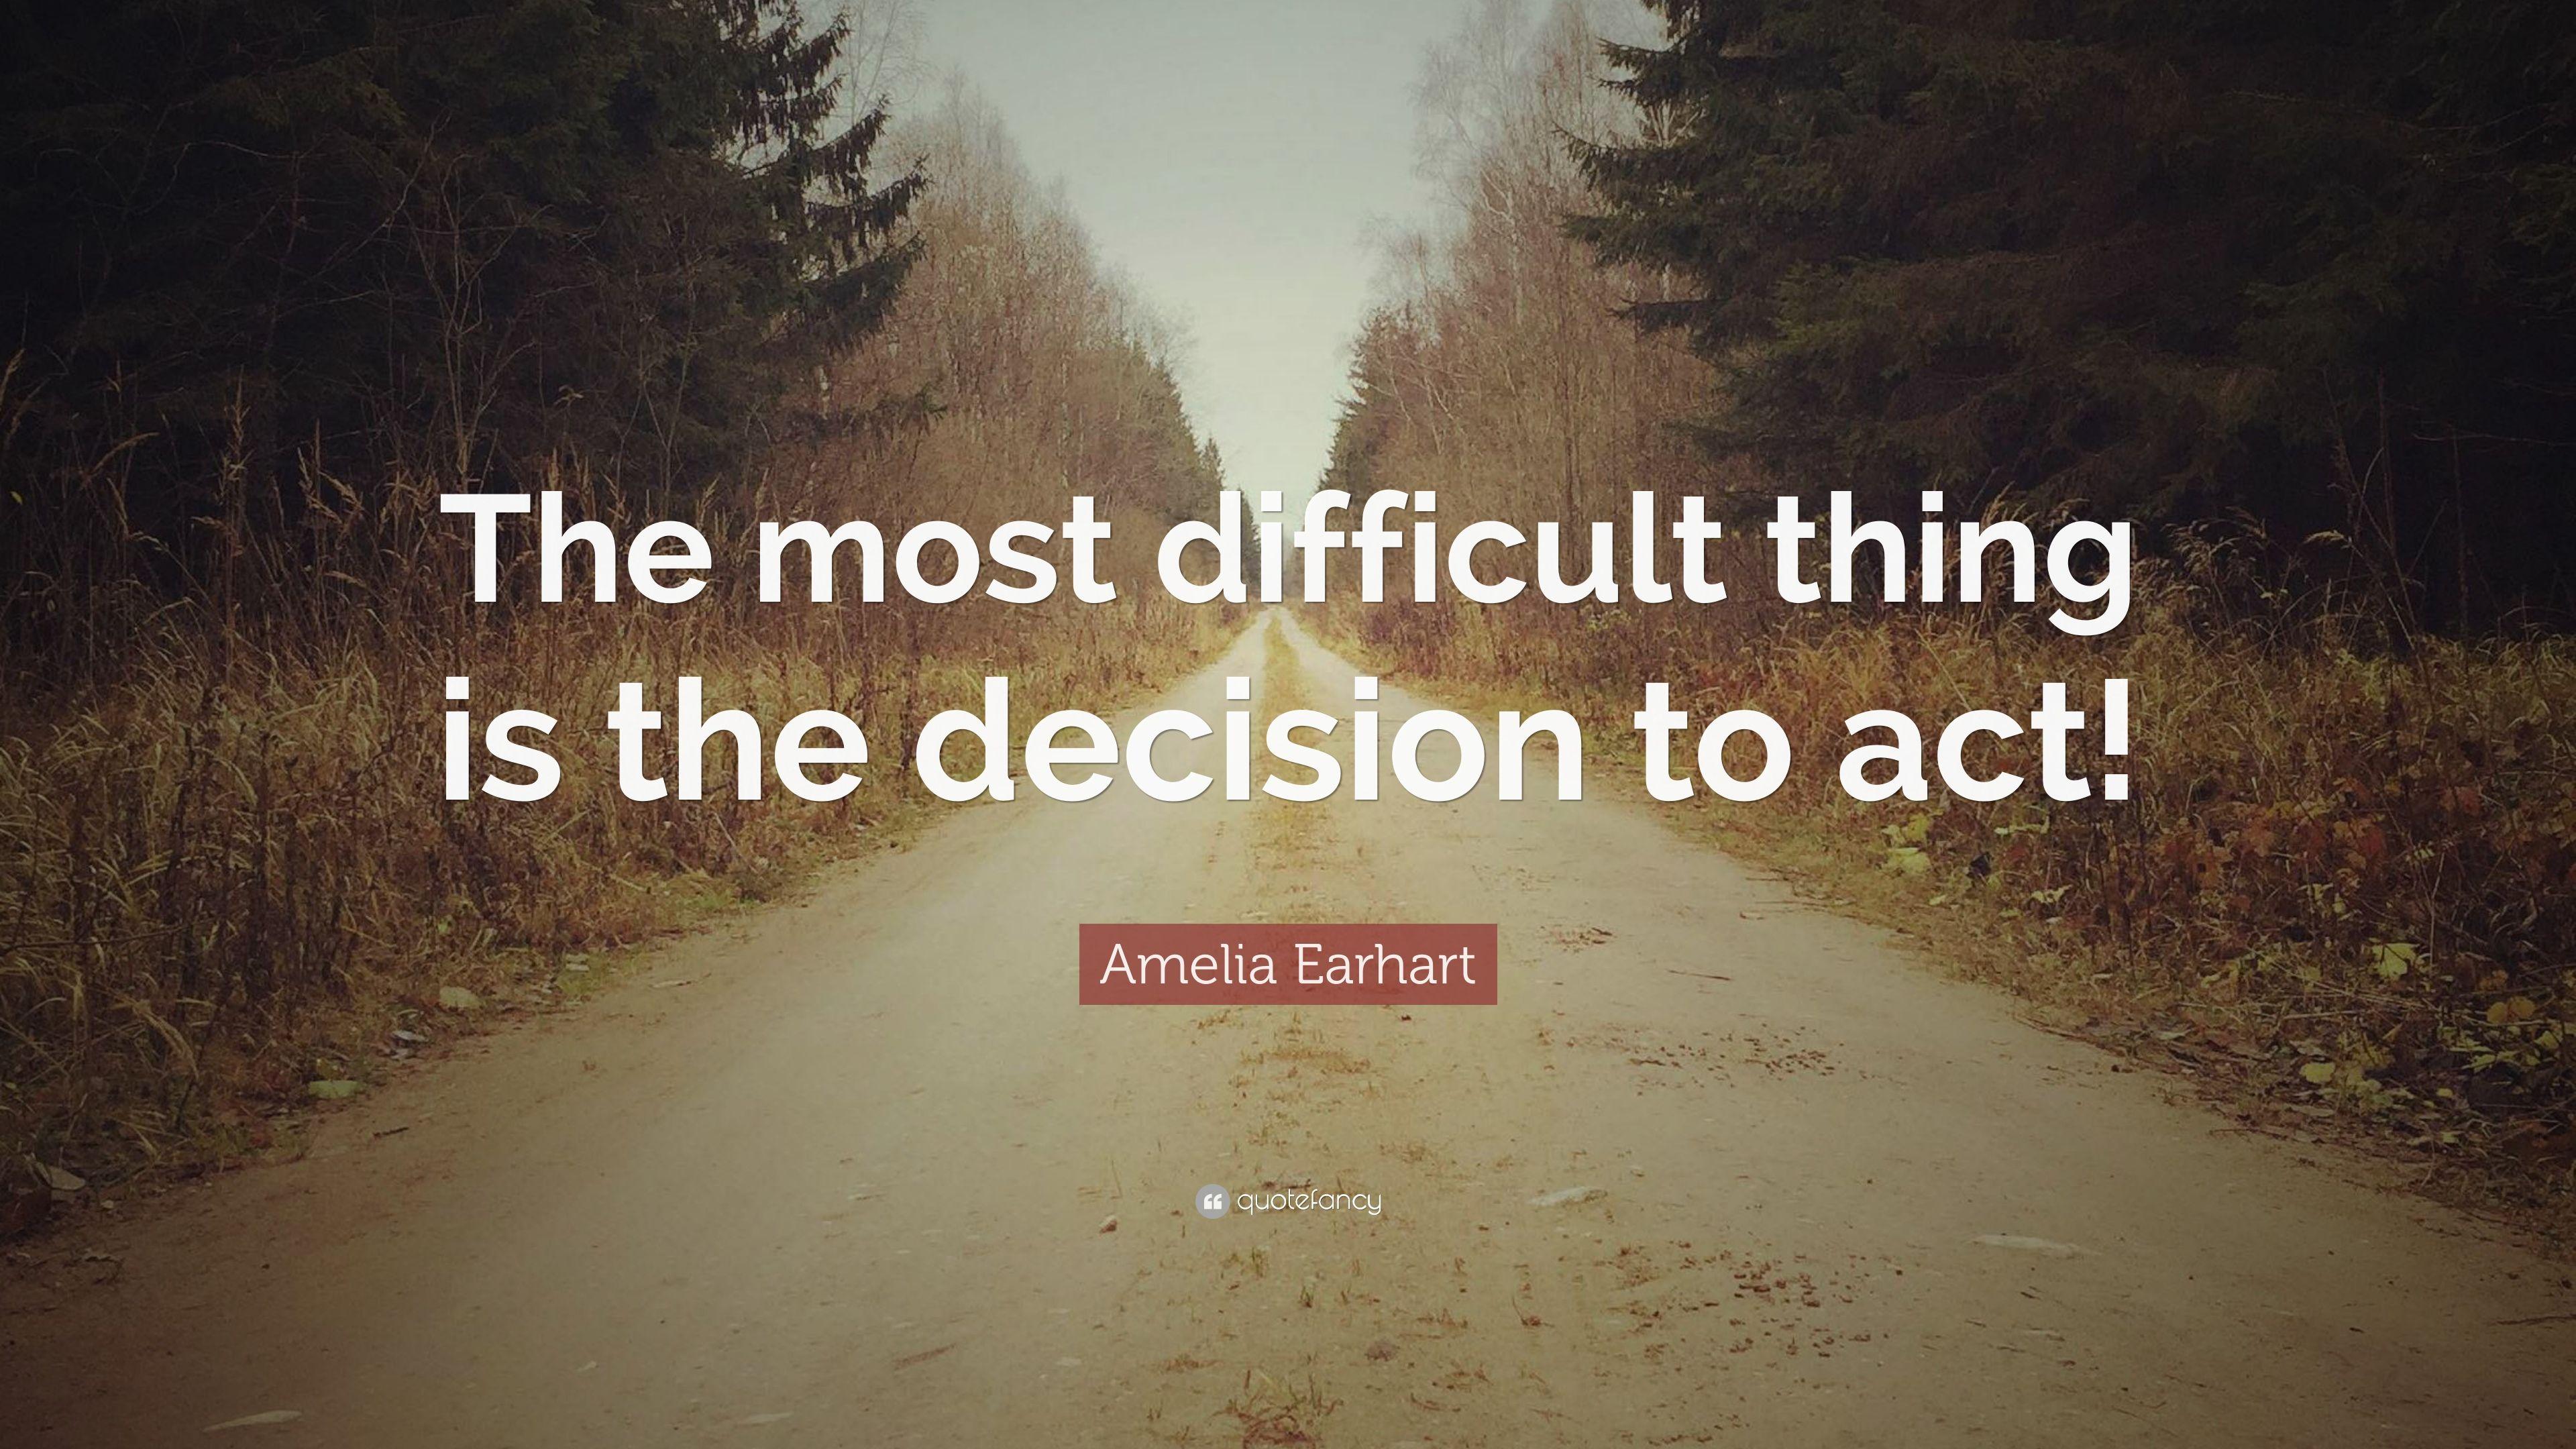 Amelia Earhart Quote: “The most difficult thing is the decision to